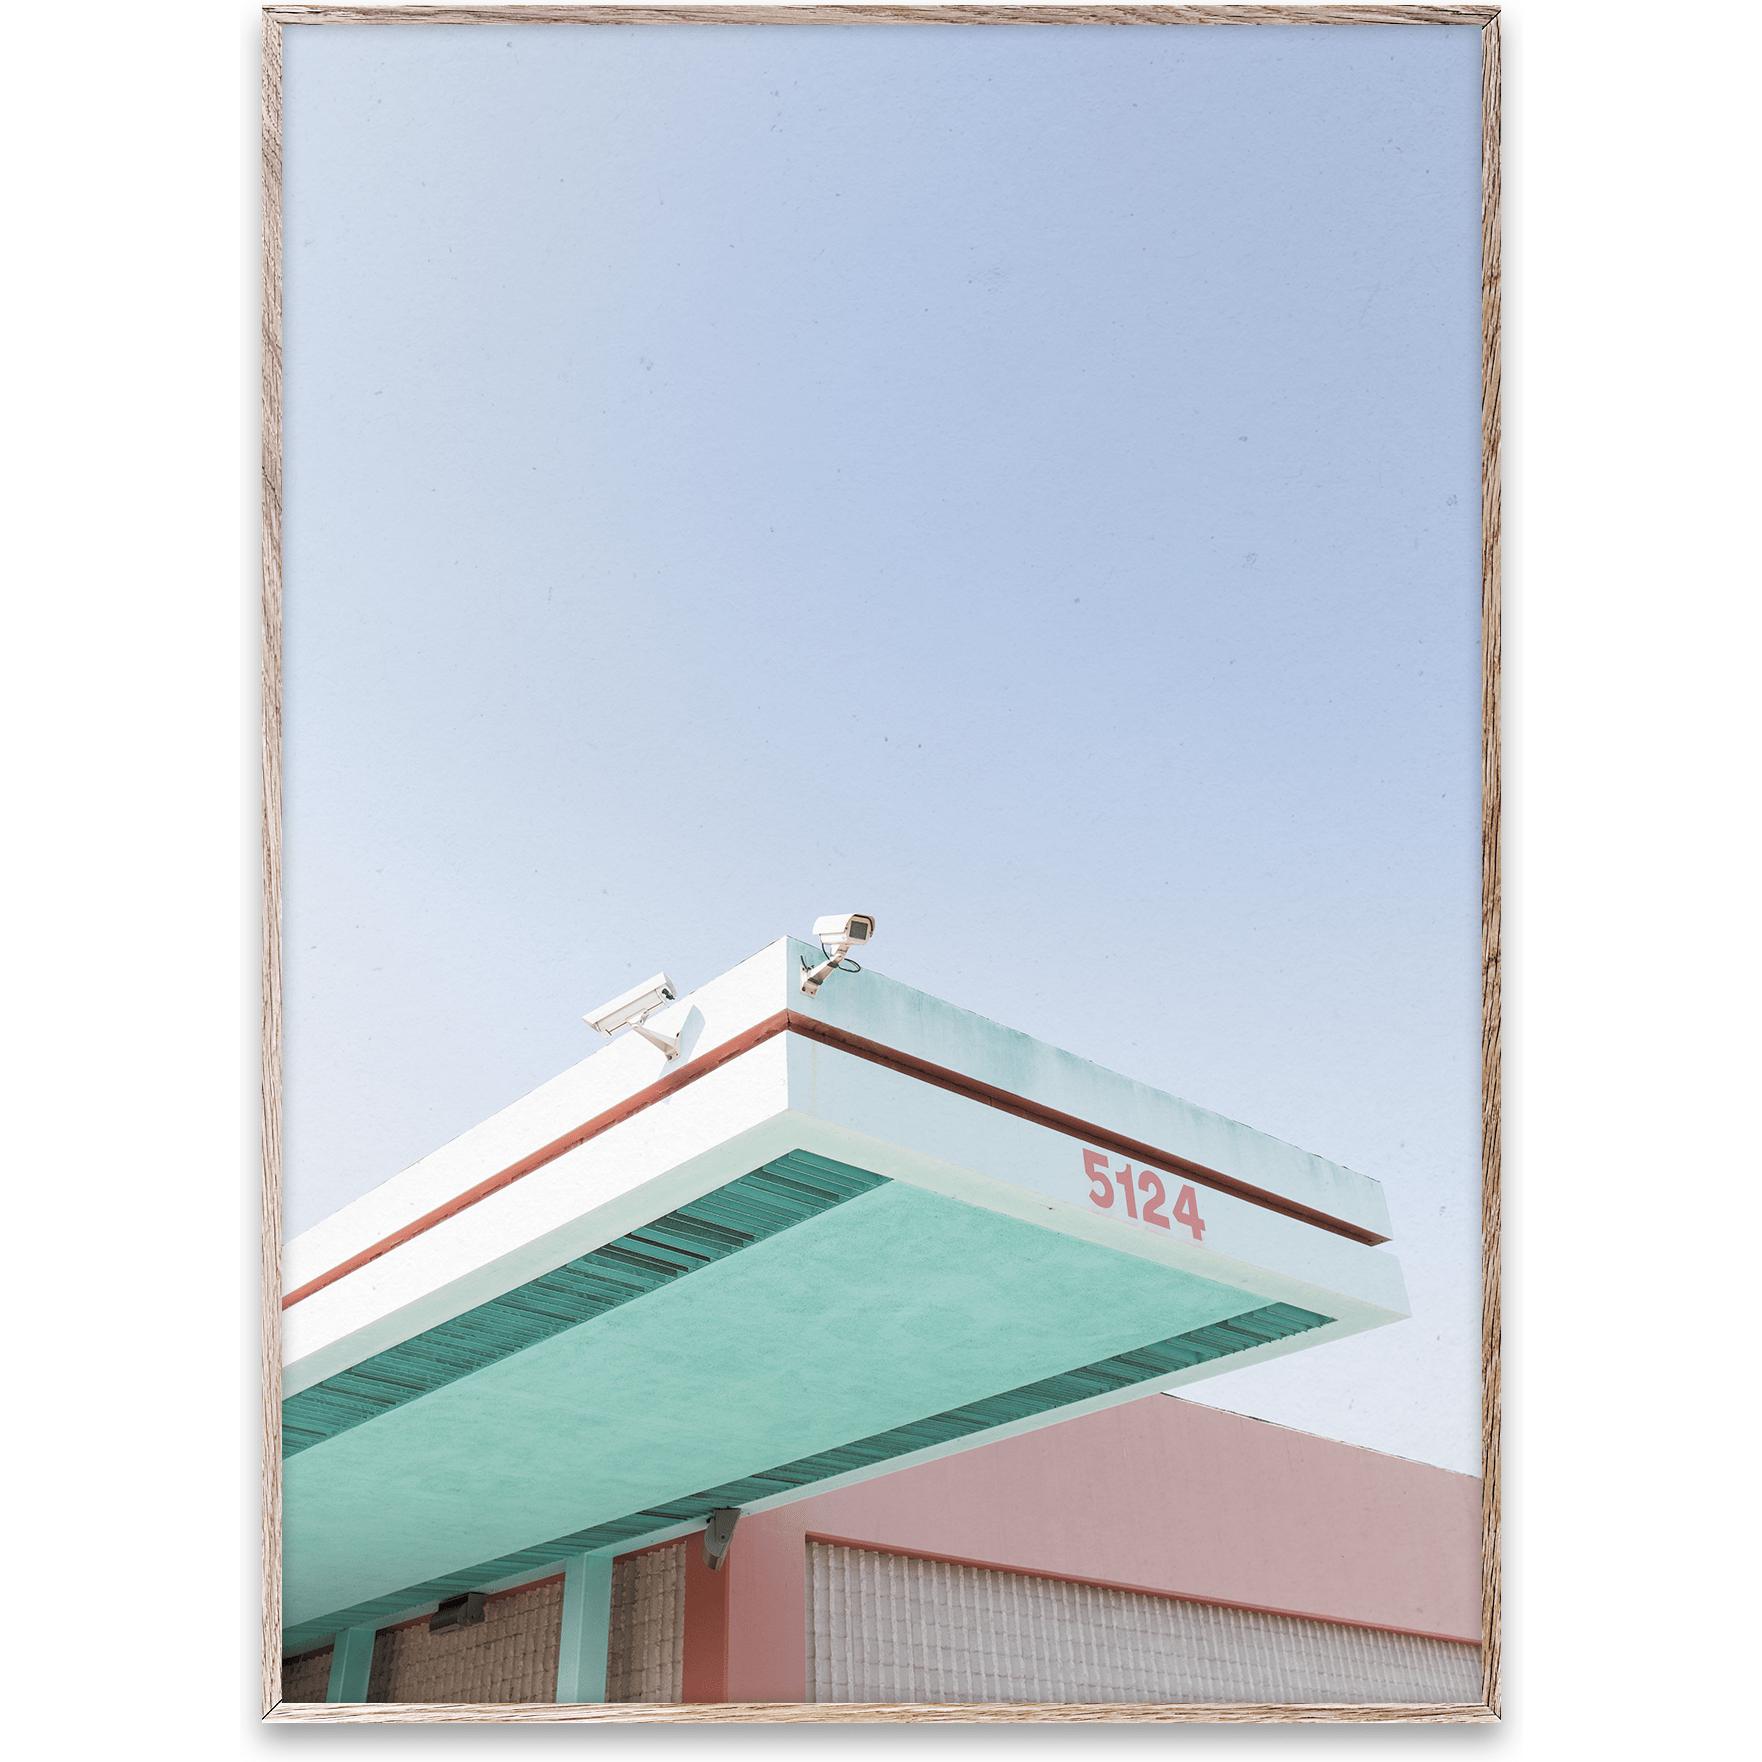 Paper Collective Los Angeles is roze 01 -poster, 30x40 cm